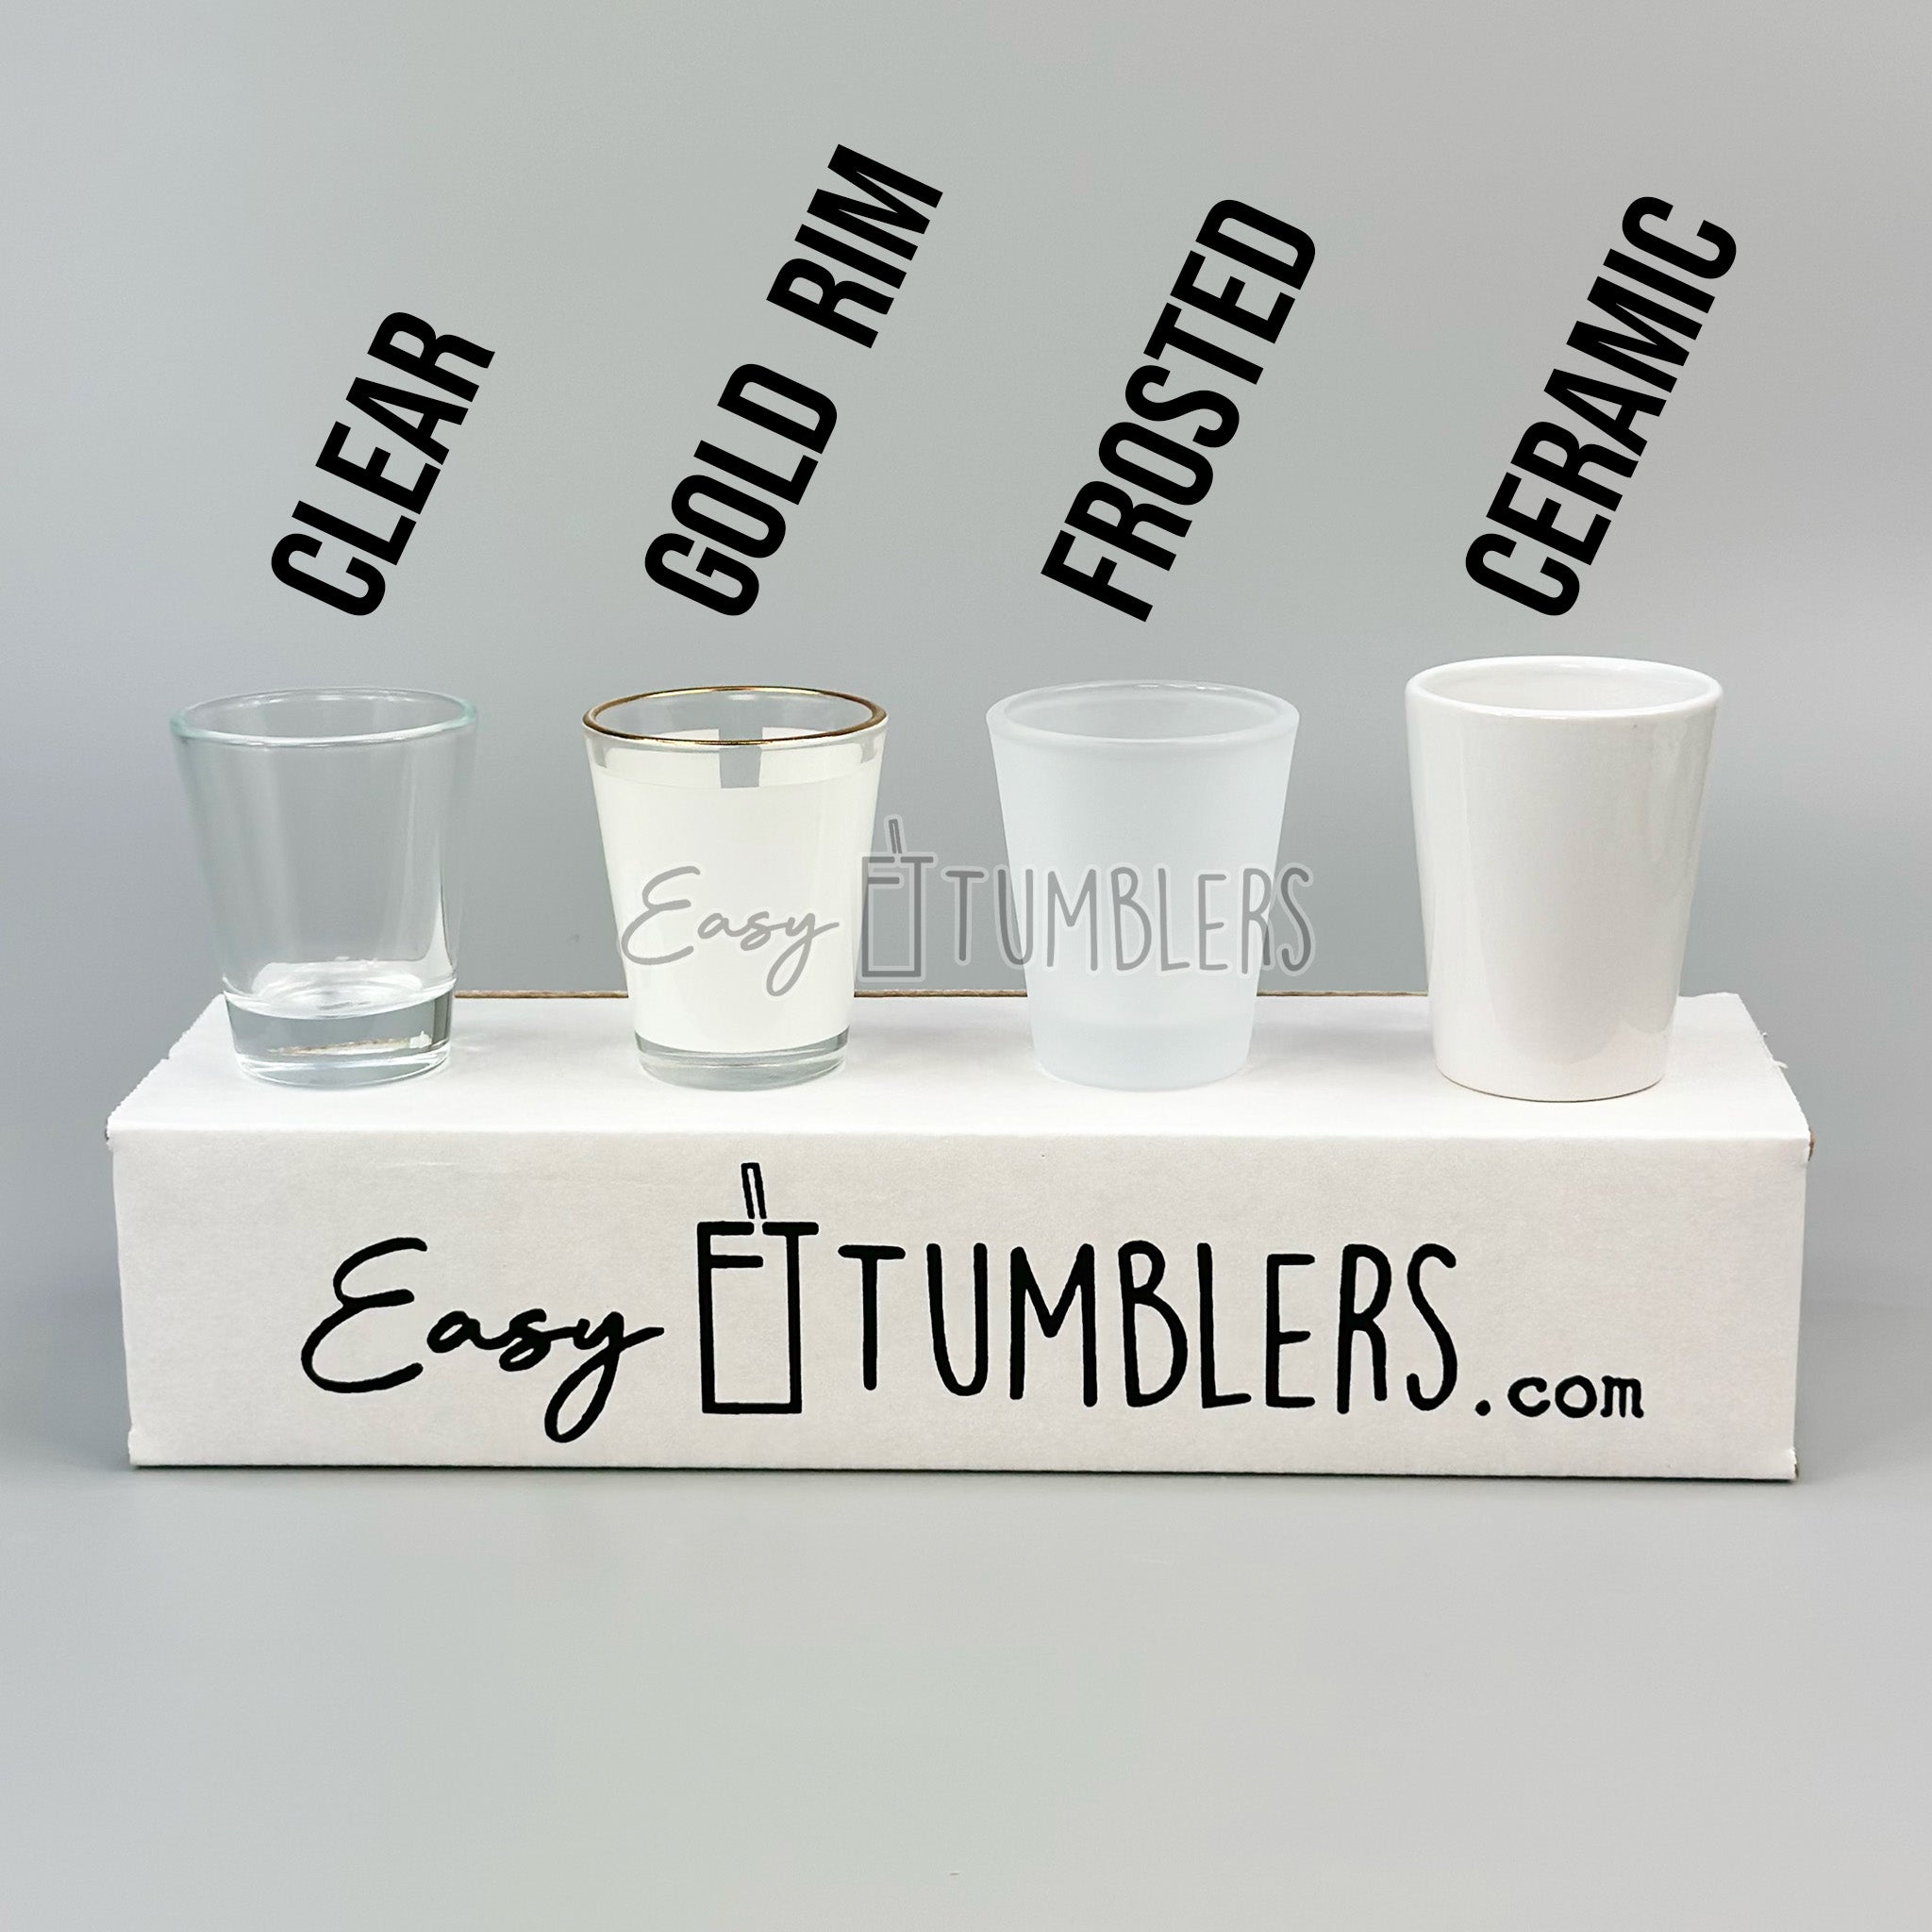 Clear Shot Glass with Gold Trim and Printable White Area 1.5 oz